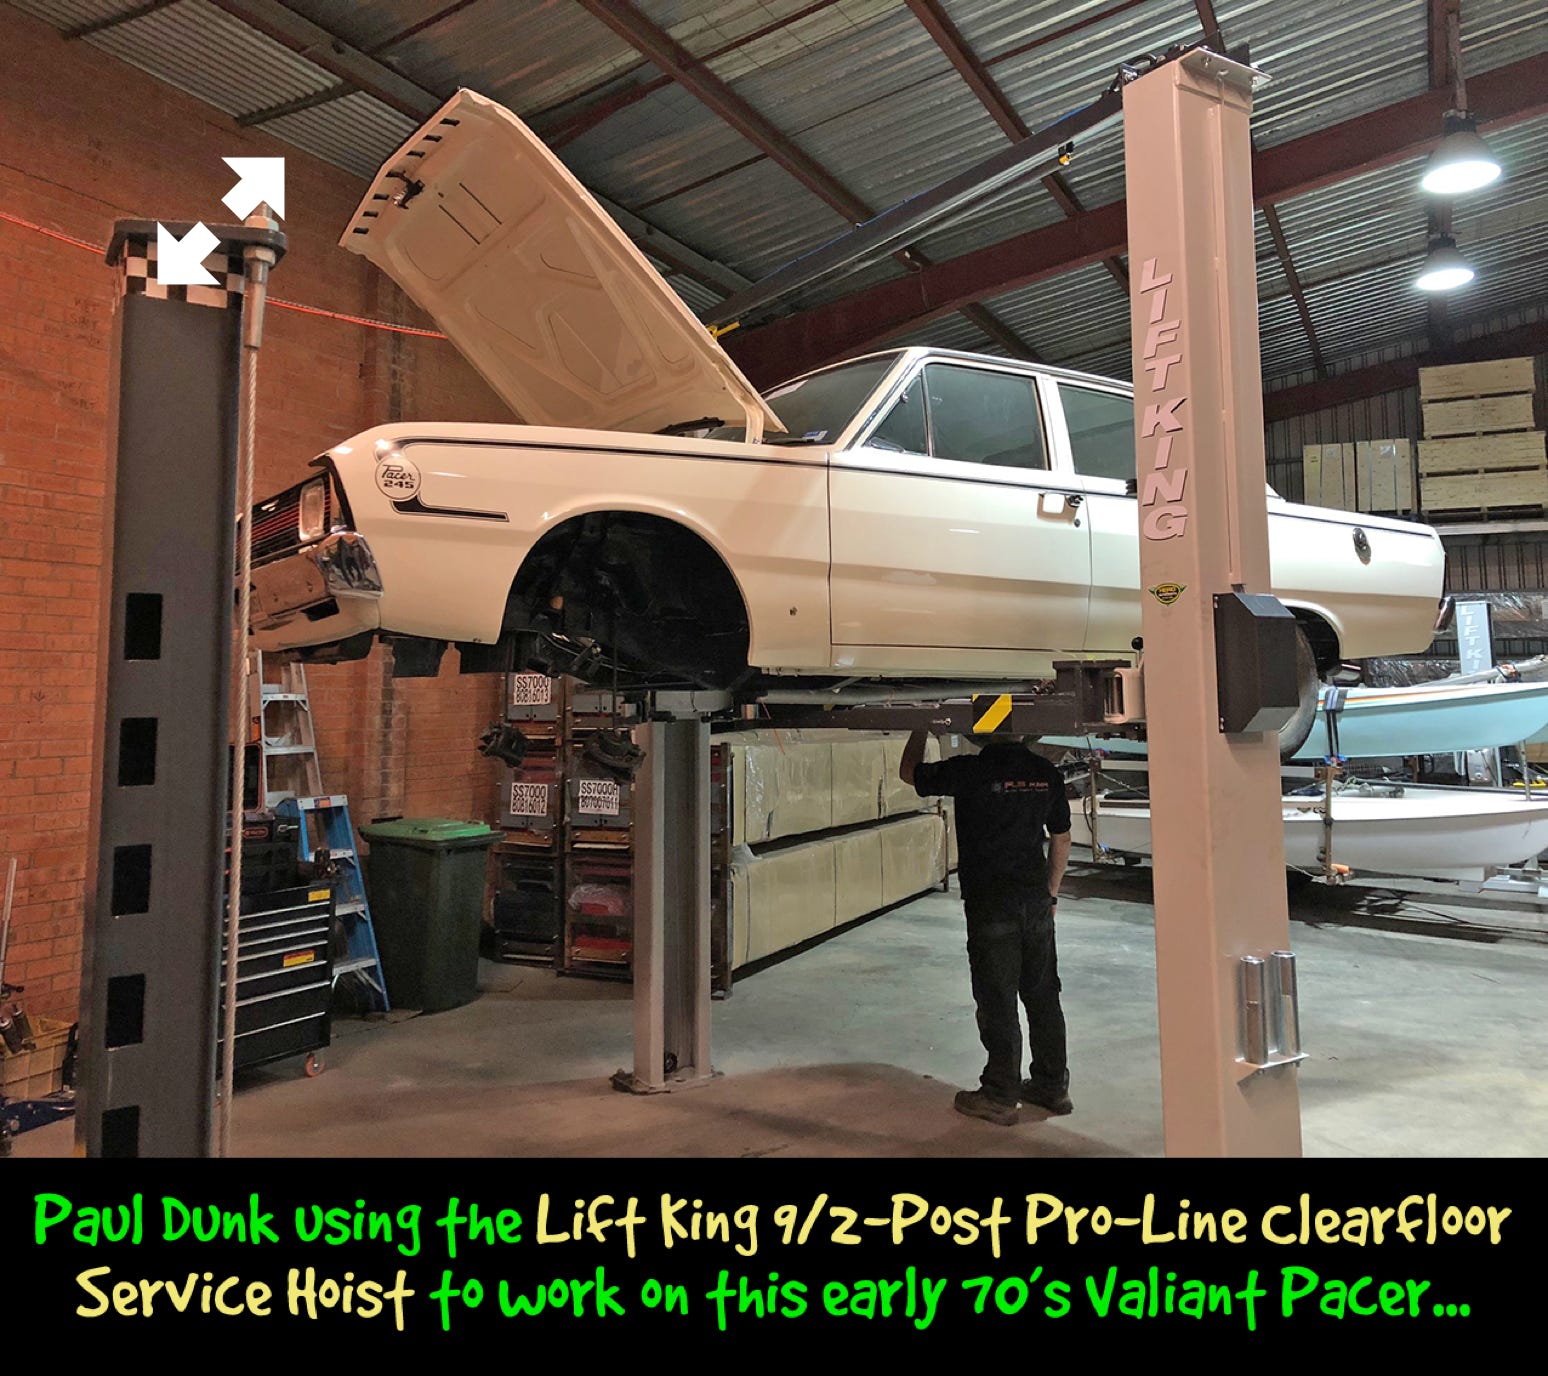 Paul Dunk... using the Lift King 9/2-Post Pro-Line Service Hoist to work on a Valiant Pacer - an iconic Aussie Musclecar from the 70's...